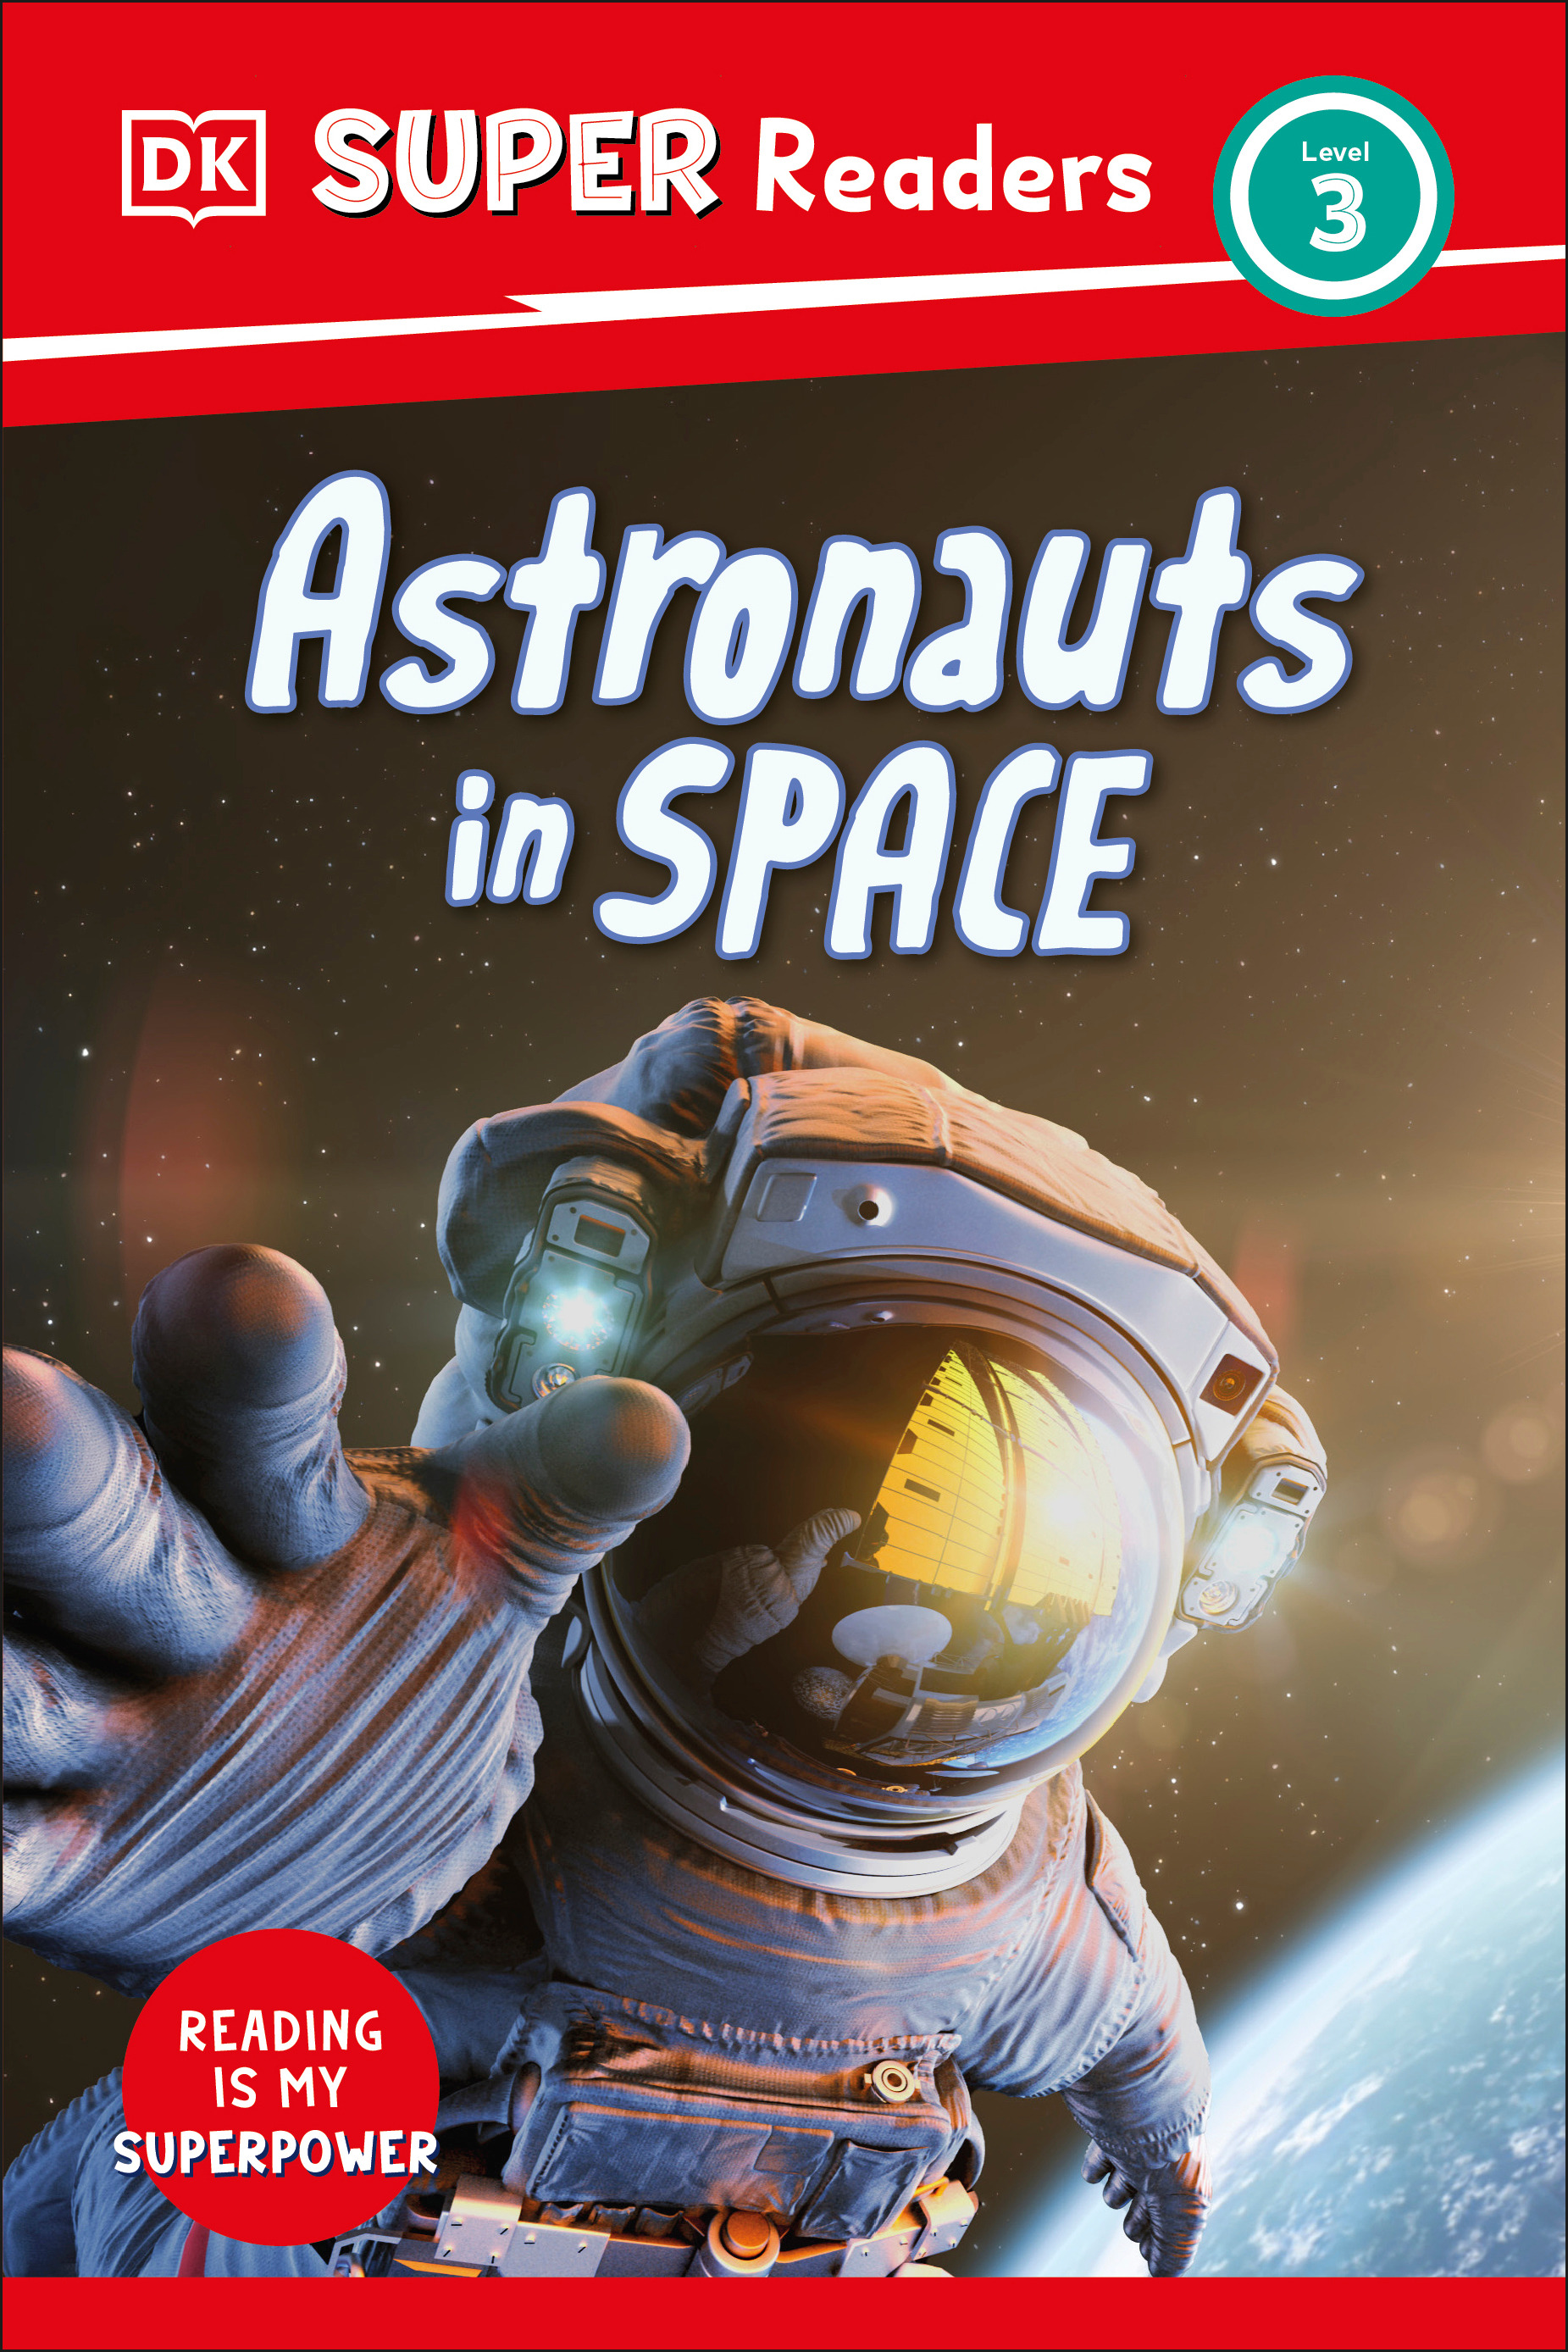 DK Super Readers Level 3 Astronauts in Space | 